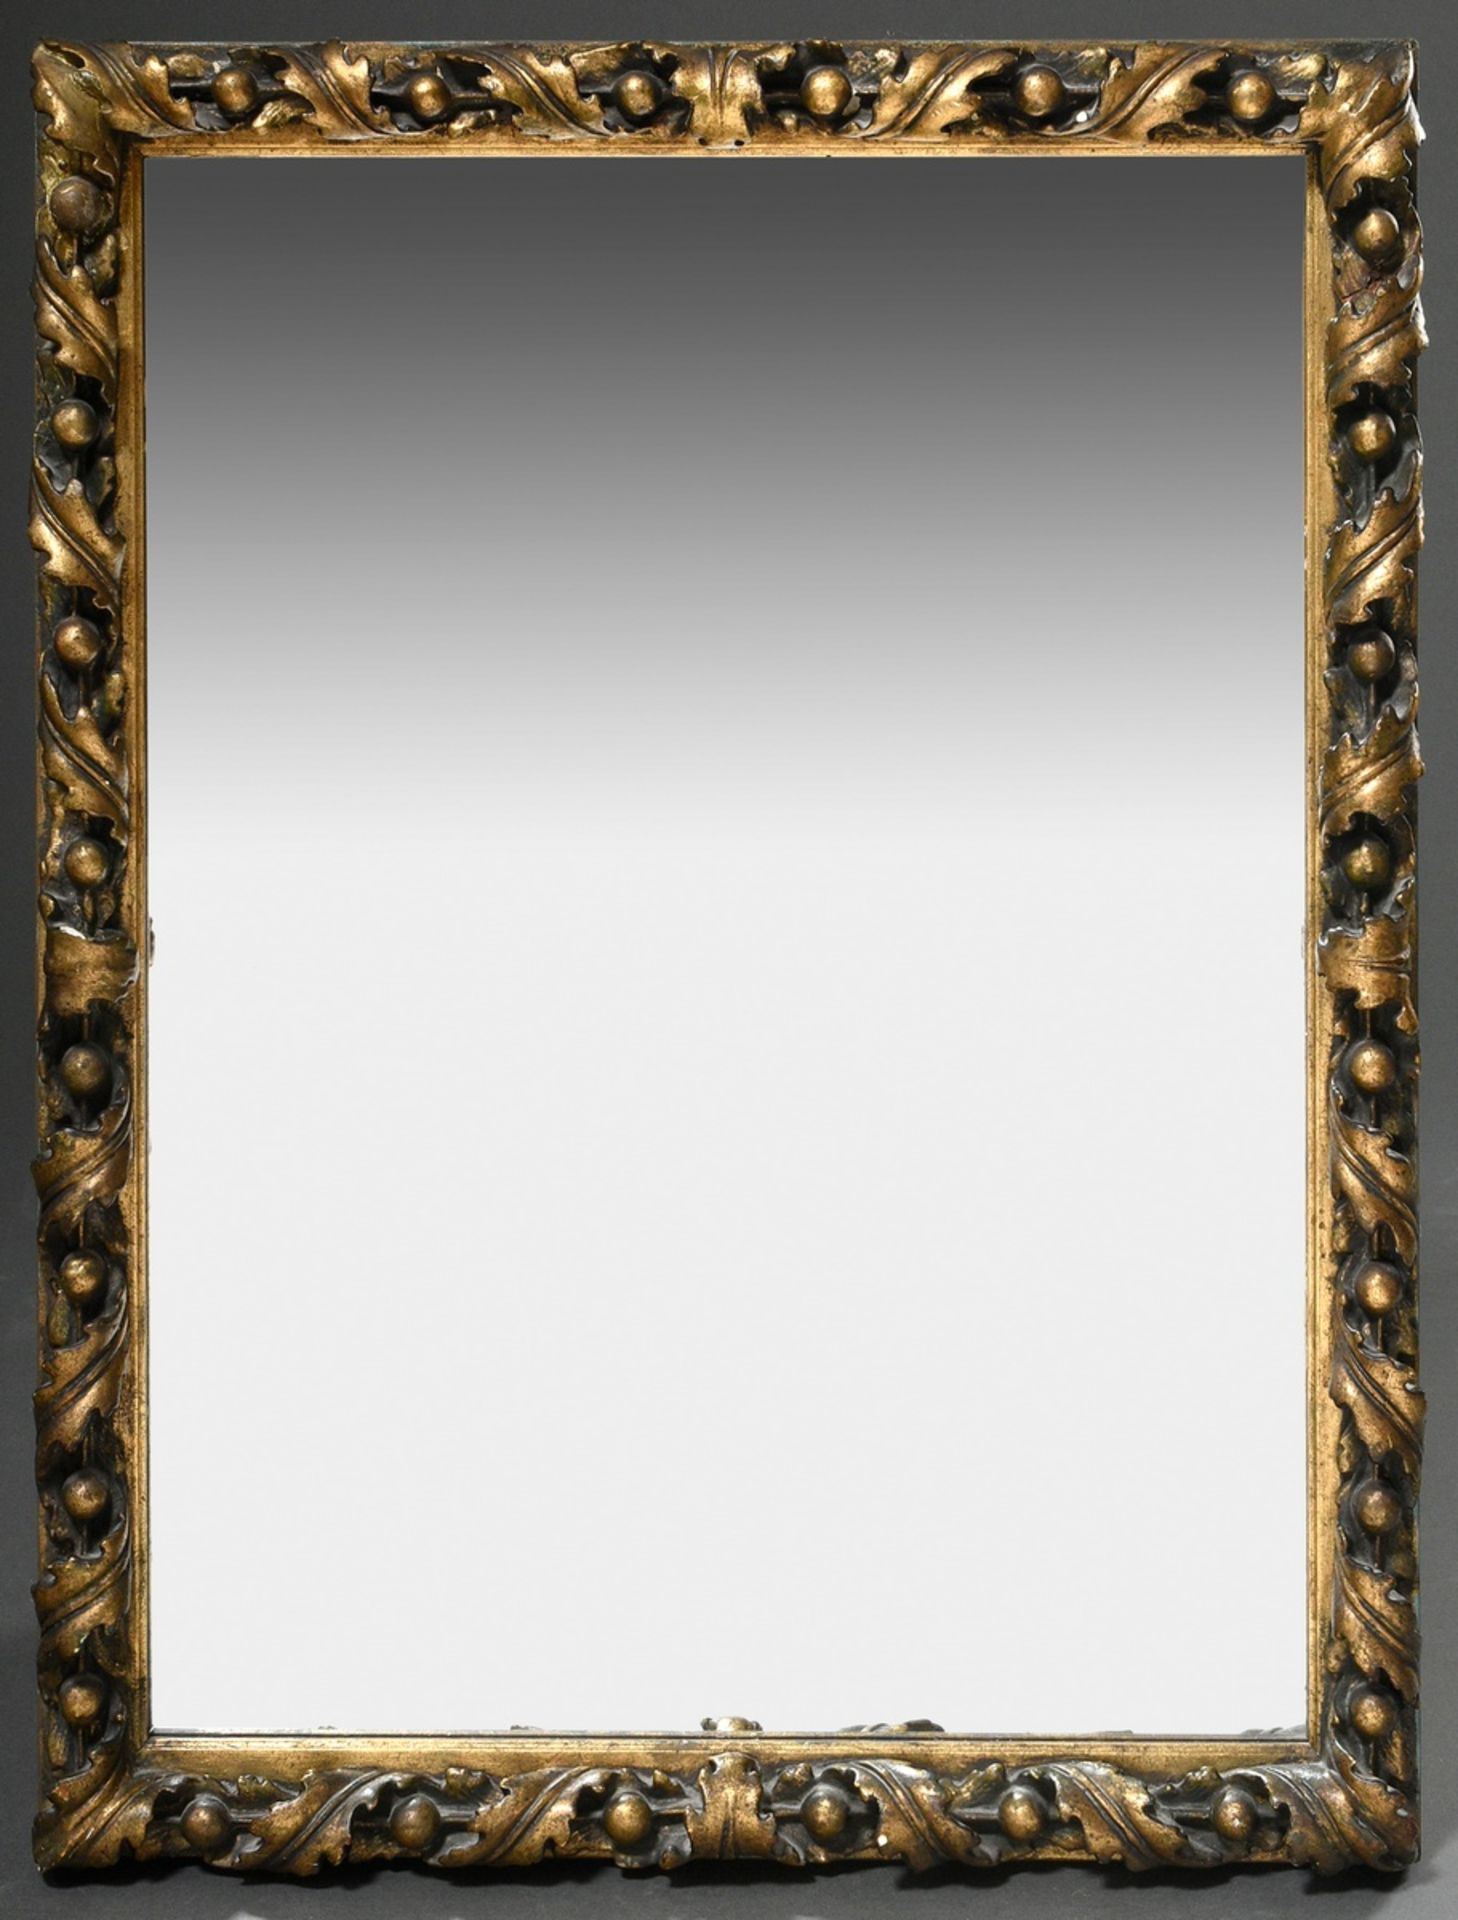 Mirror with surrounding oak leaf and fruit frieze, stucco gilded, 63x50cm, small defects